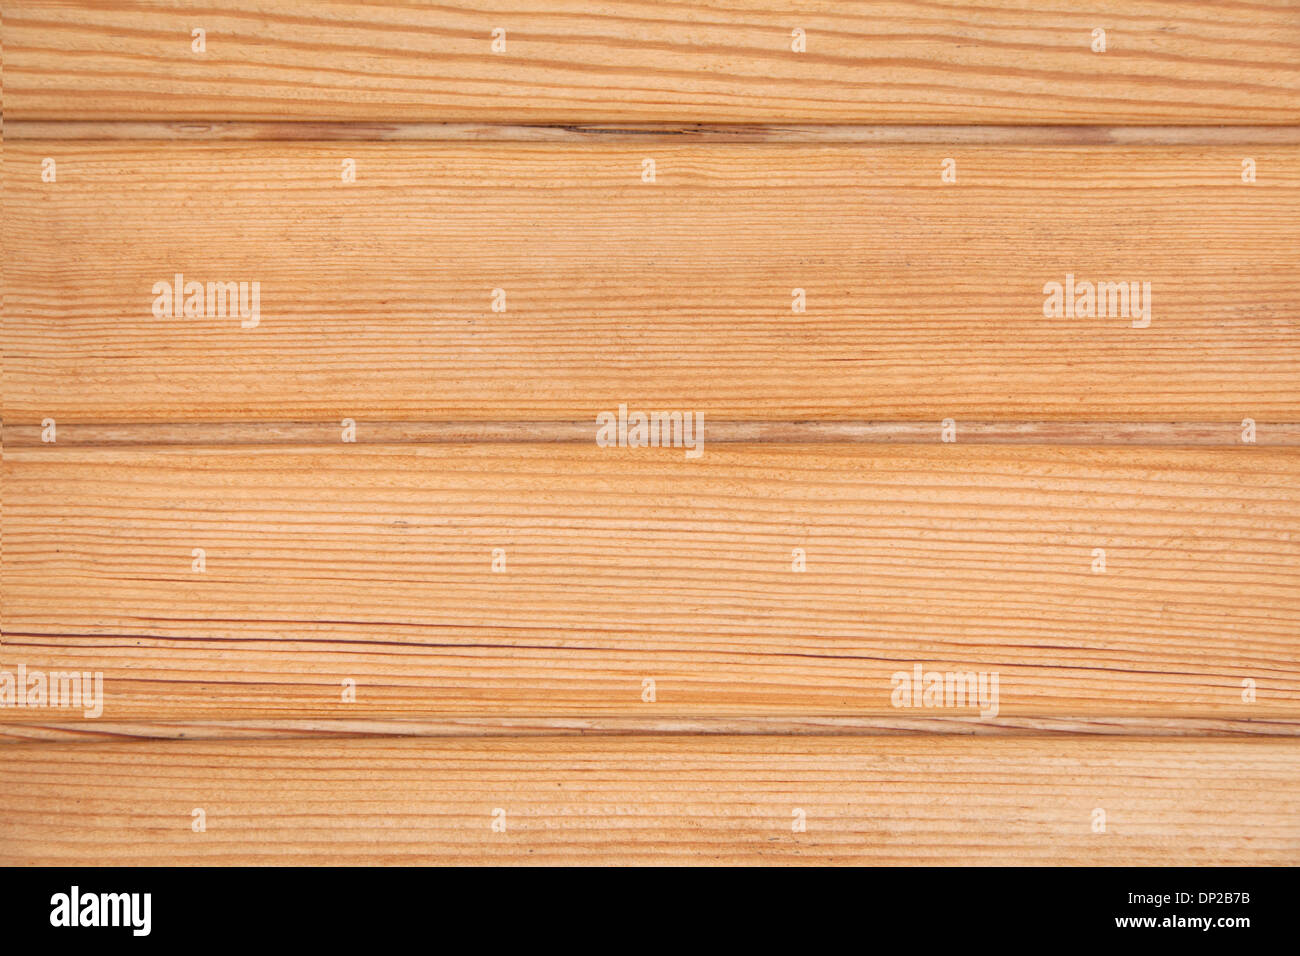 Pine wood board for backgrounds Stock Photo